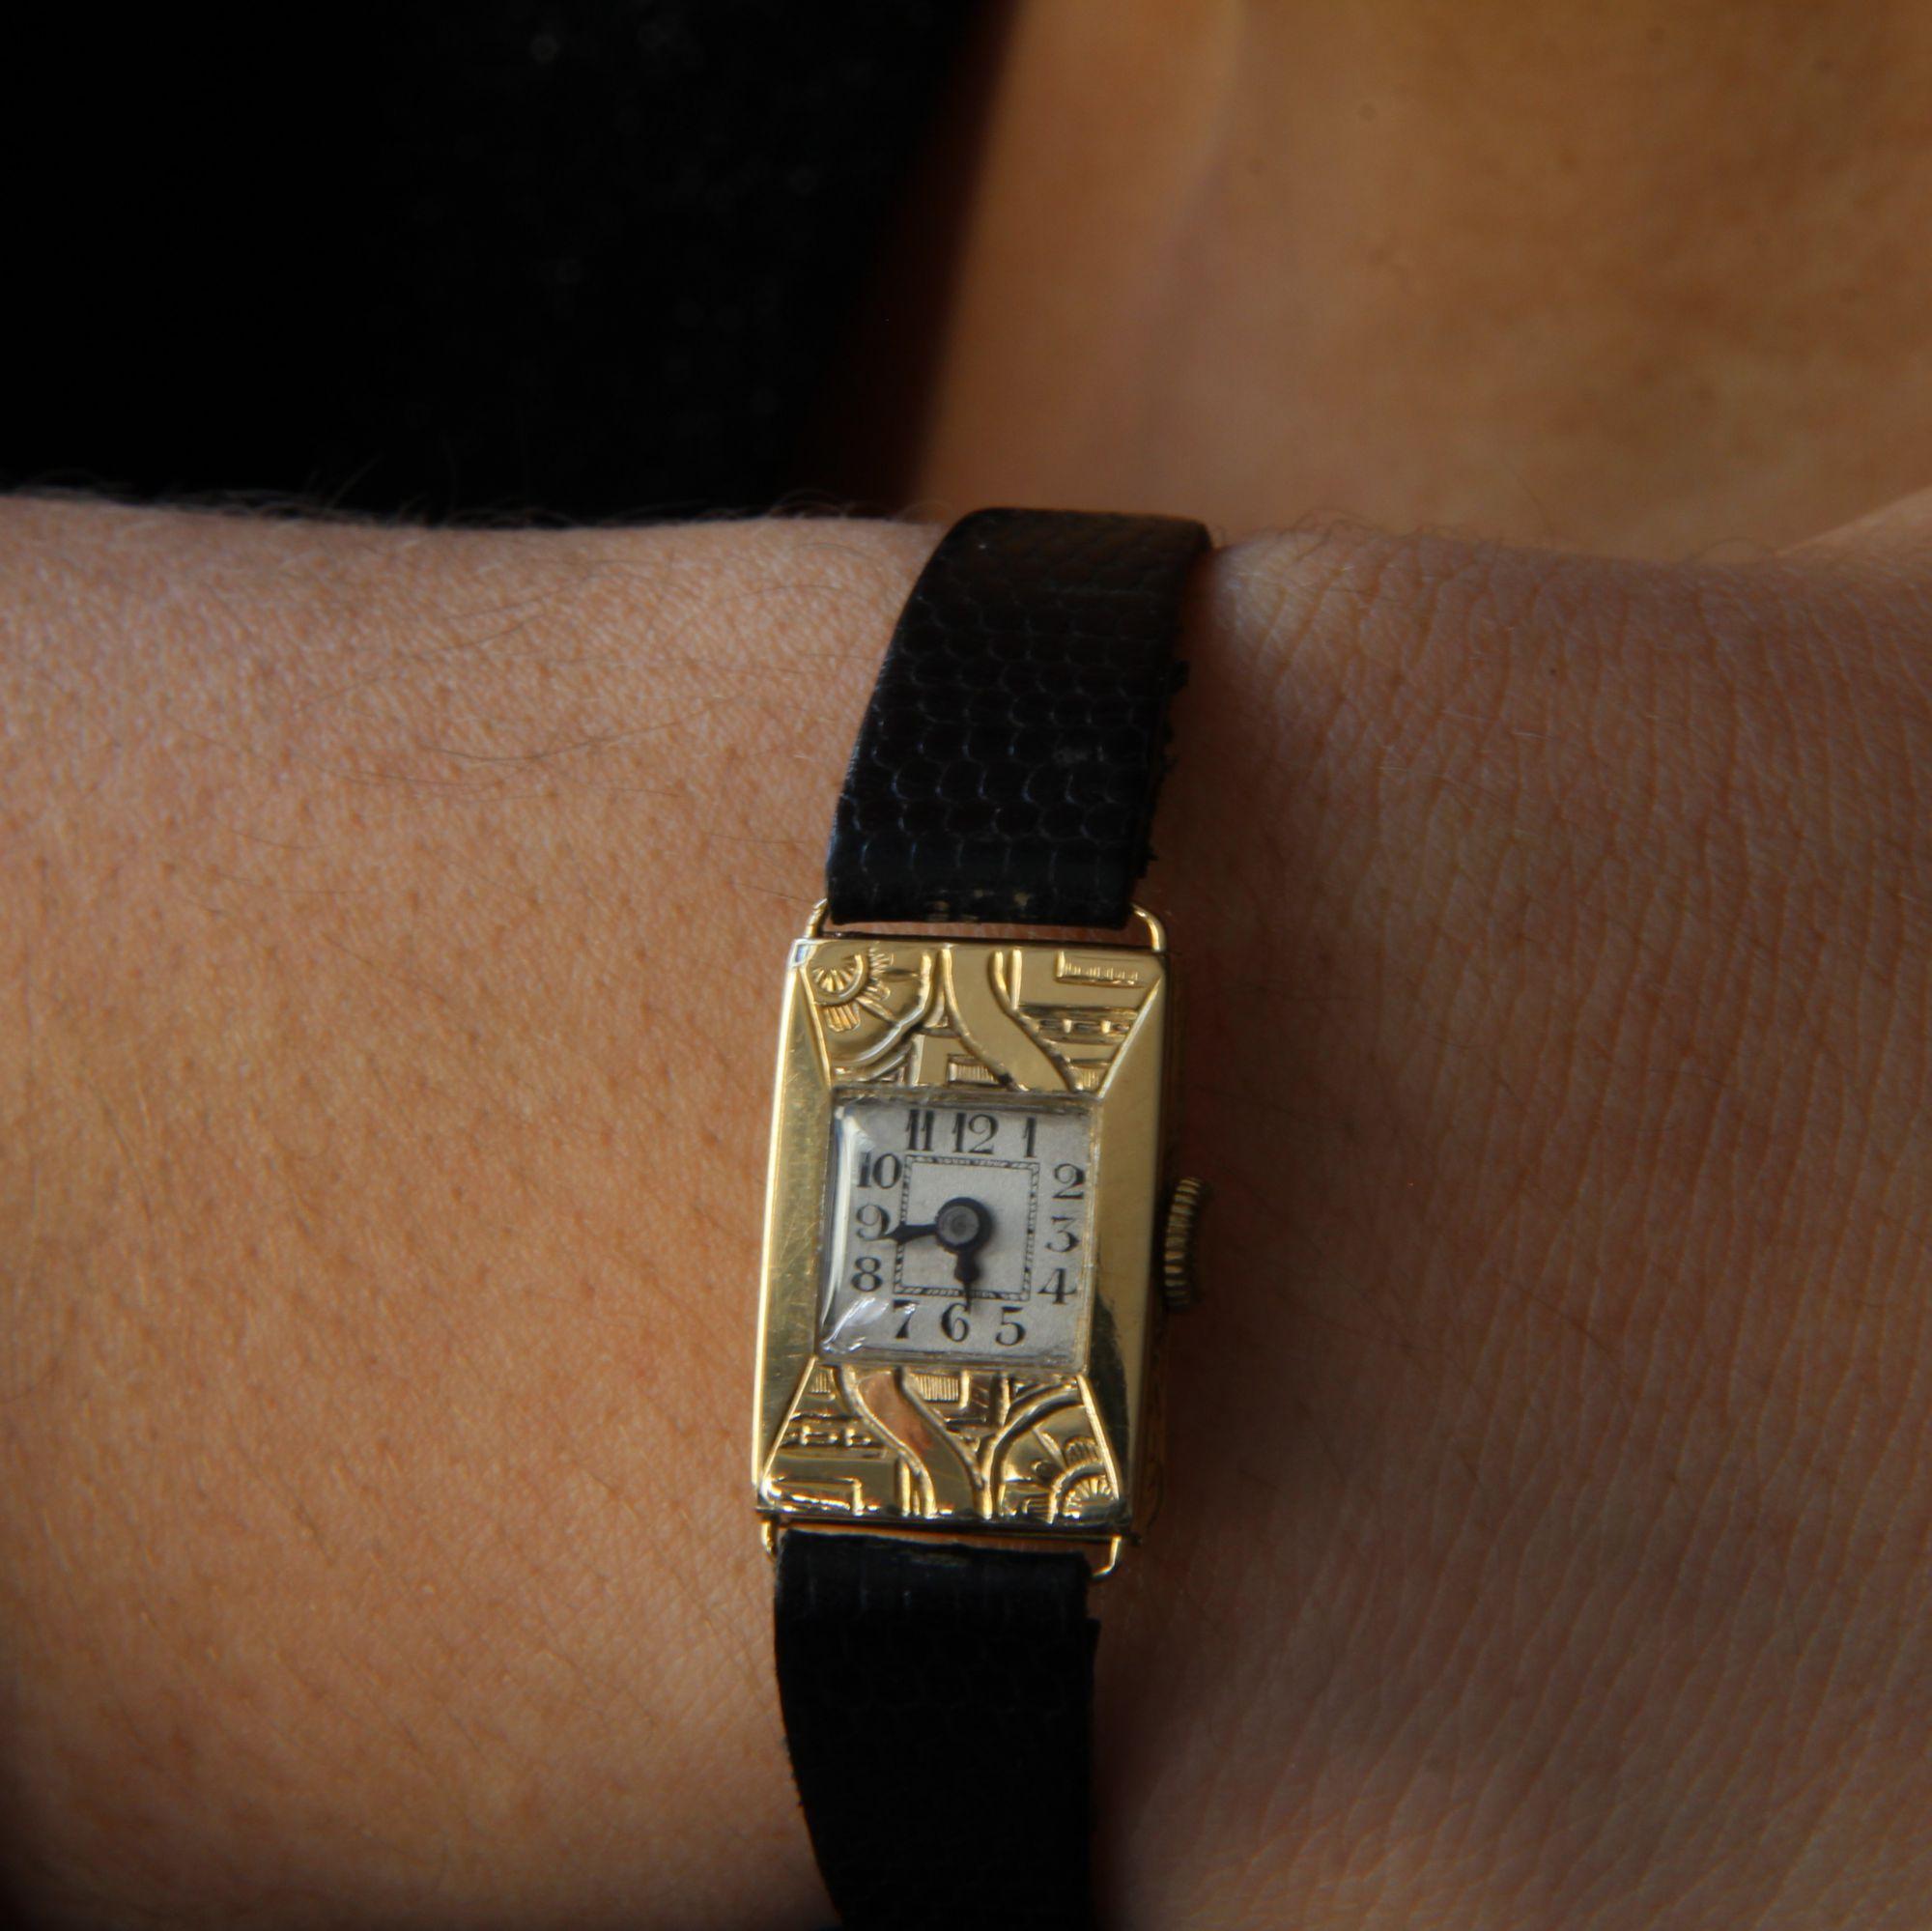 Lady's watch in 18 karat yellow gold, owl hallmark.
Charming jewel watch, it has a rectangular dial engraved with art deco pattern : flowers, geometric designs and curves, the back is smooth and has a number: 71818, the edges are also chased. The